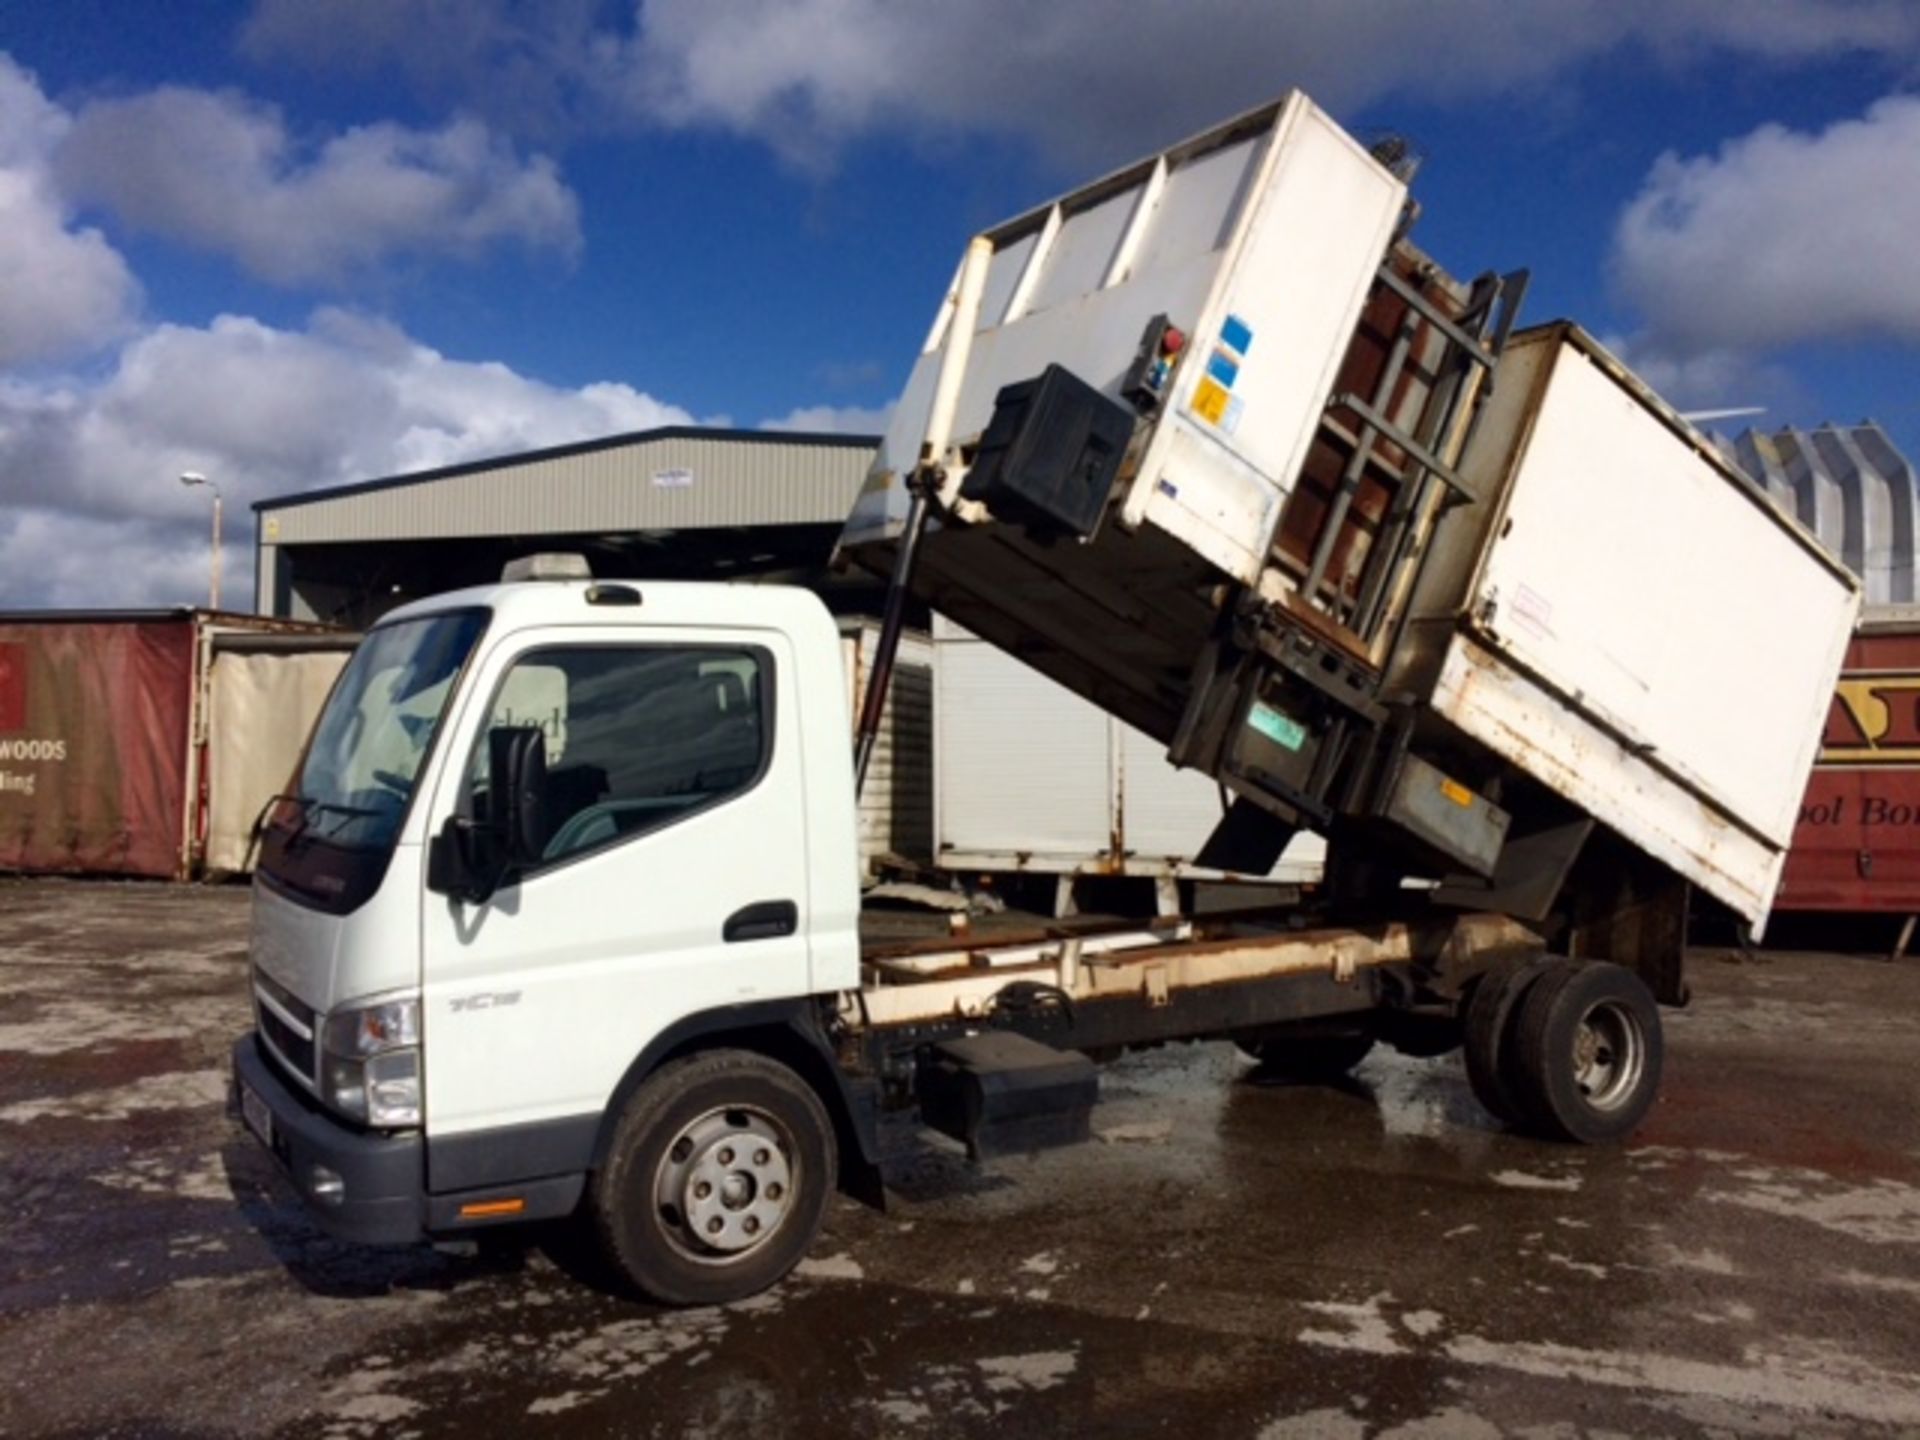 2009 Mitsubishi Canter 7C15 recycling Truck - Image 2 of 5